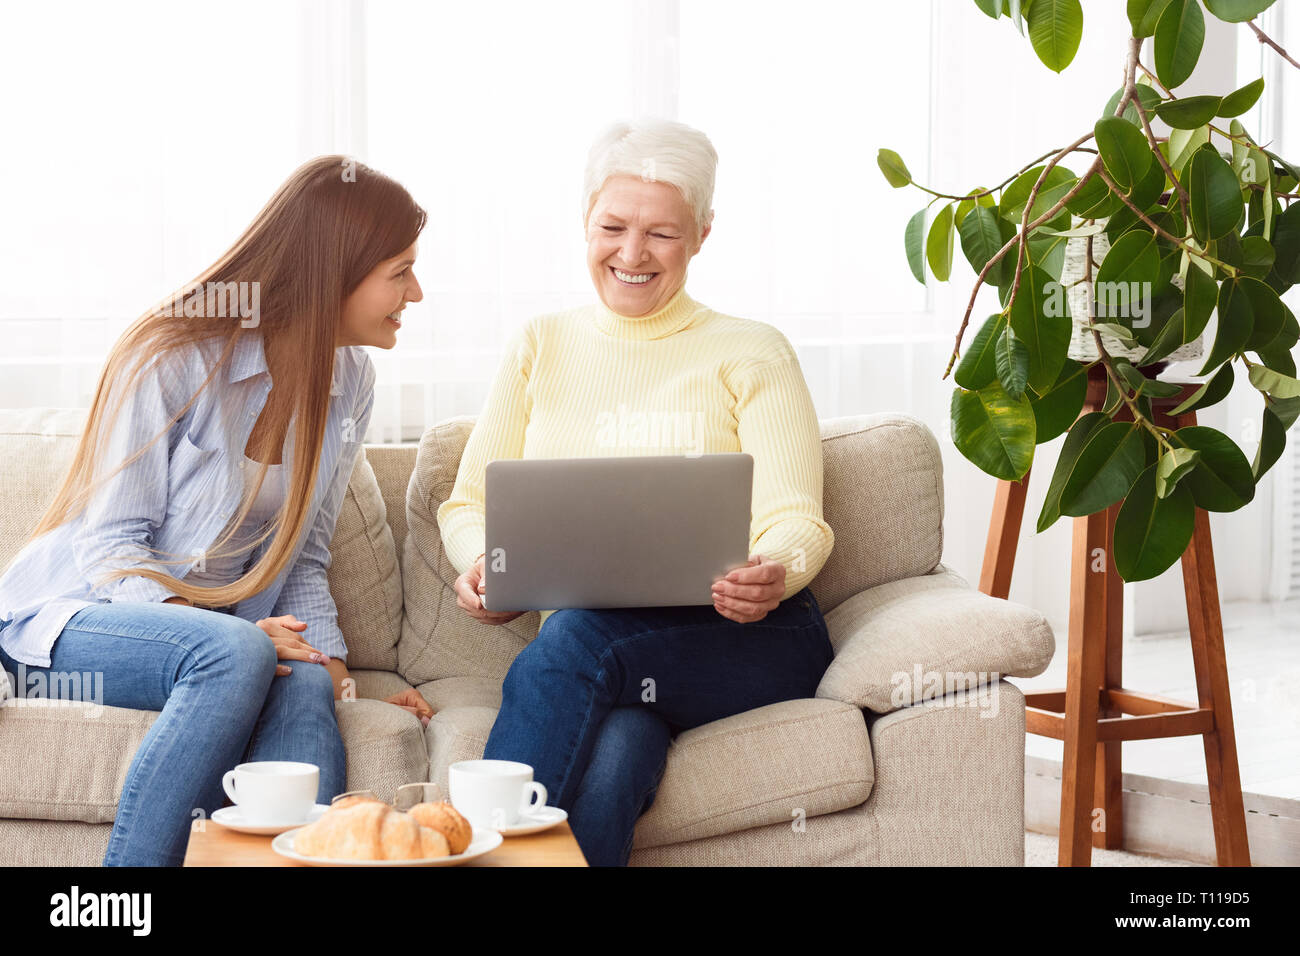 Laughing mother and daughter watching videos on laptop Stock Photo